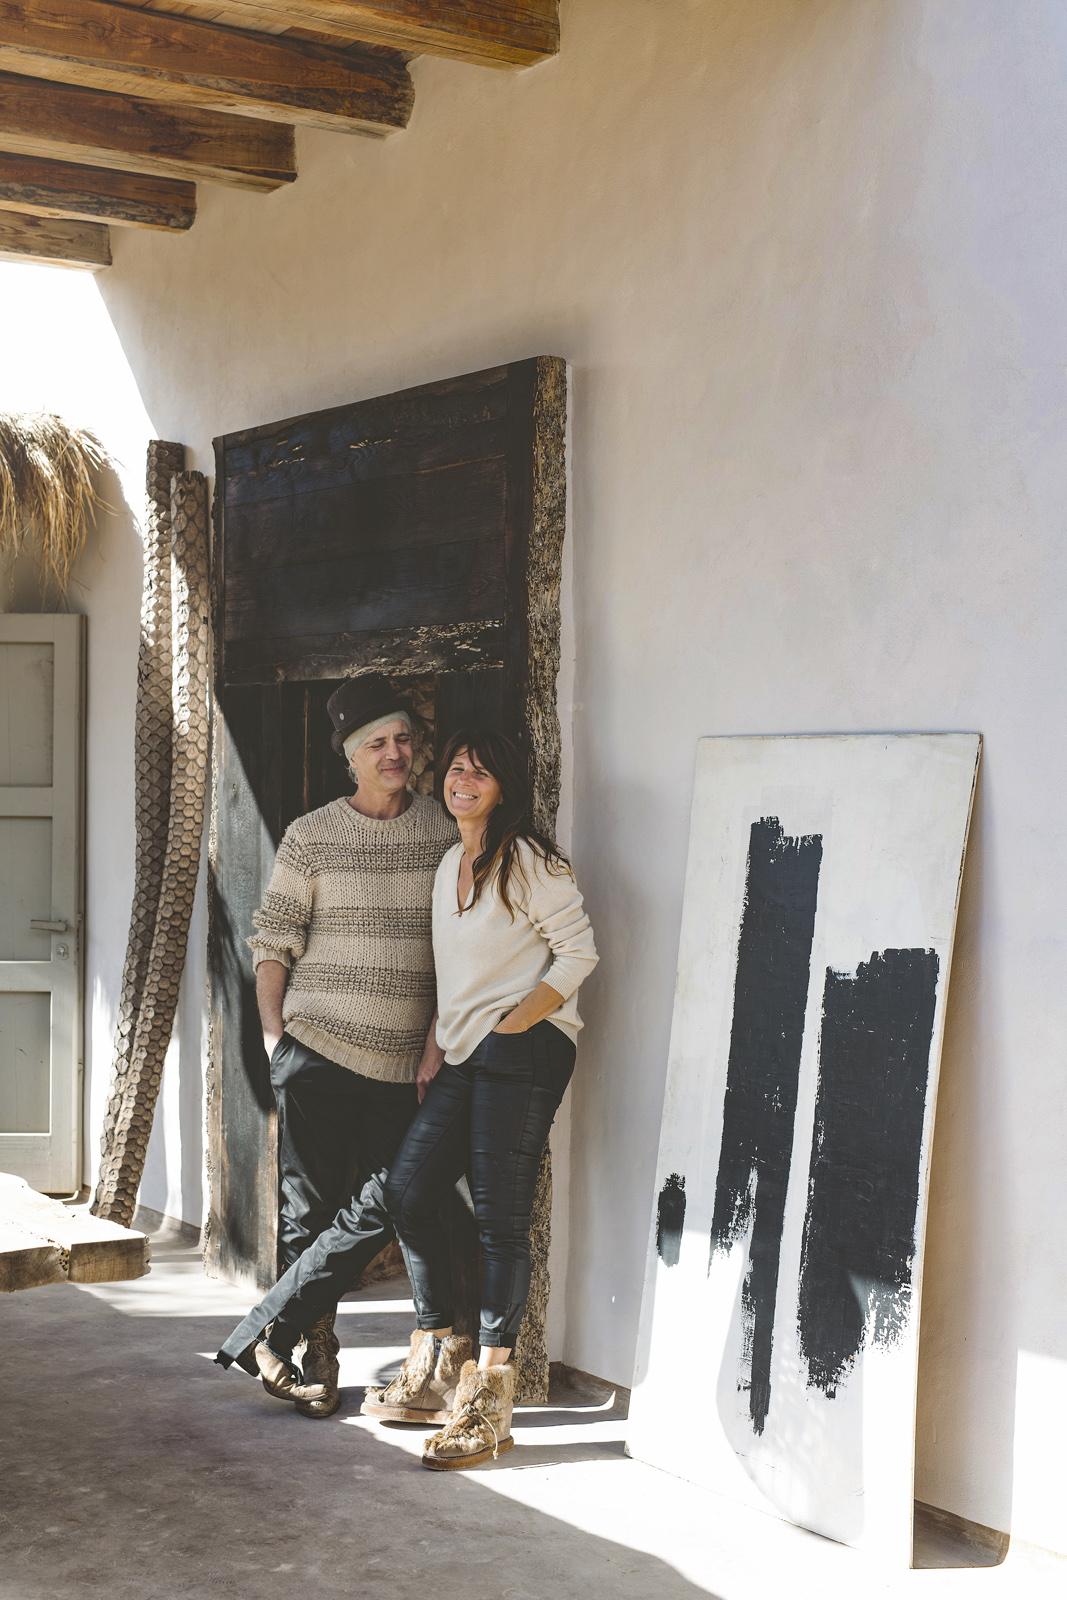 David Chianese & Anna Tassini from Indigo Architecture photographed by Ana Lui